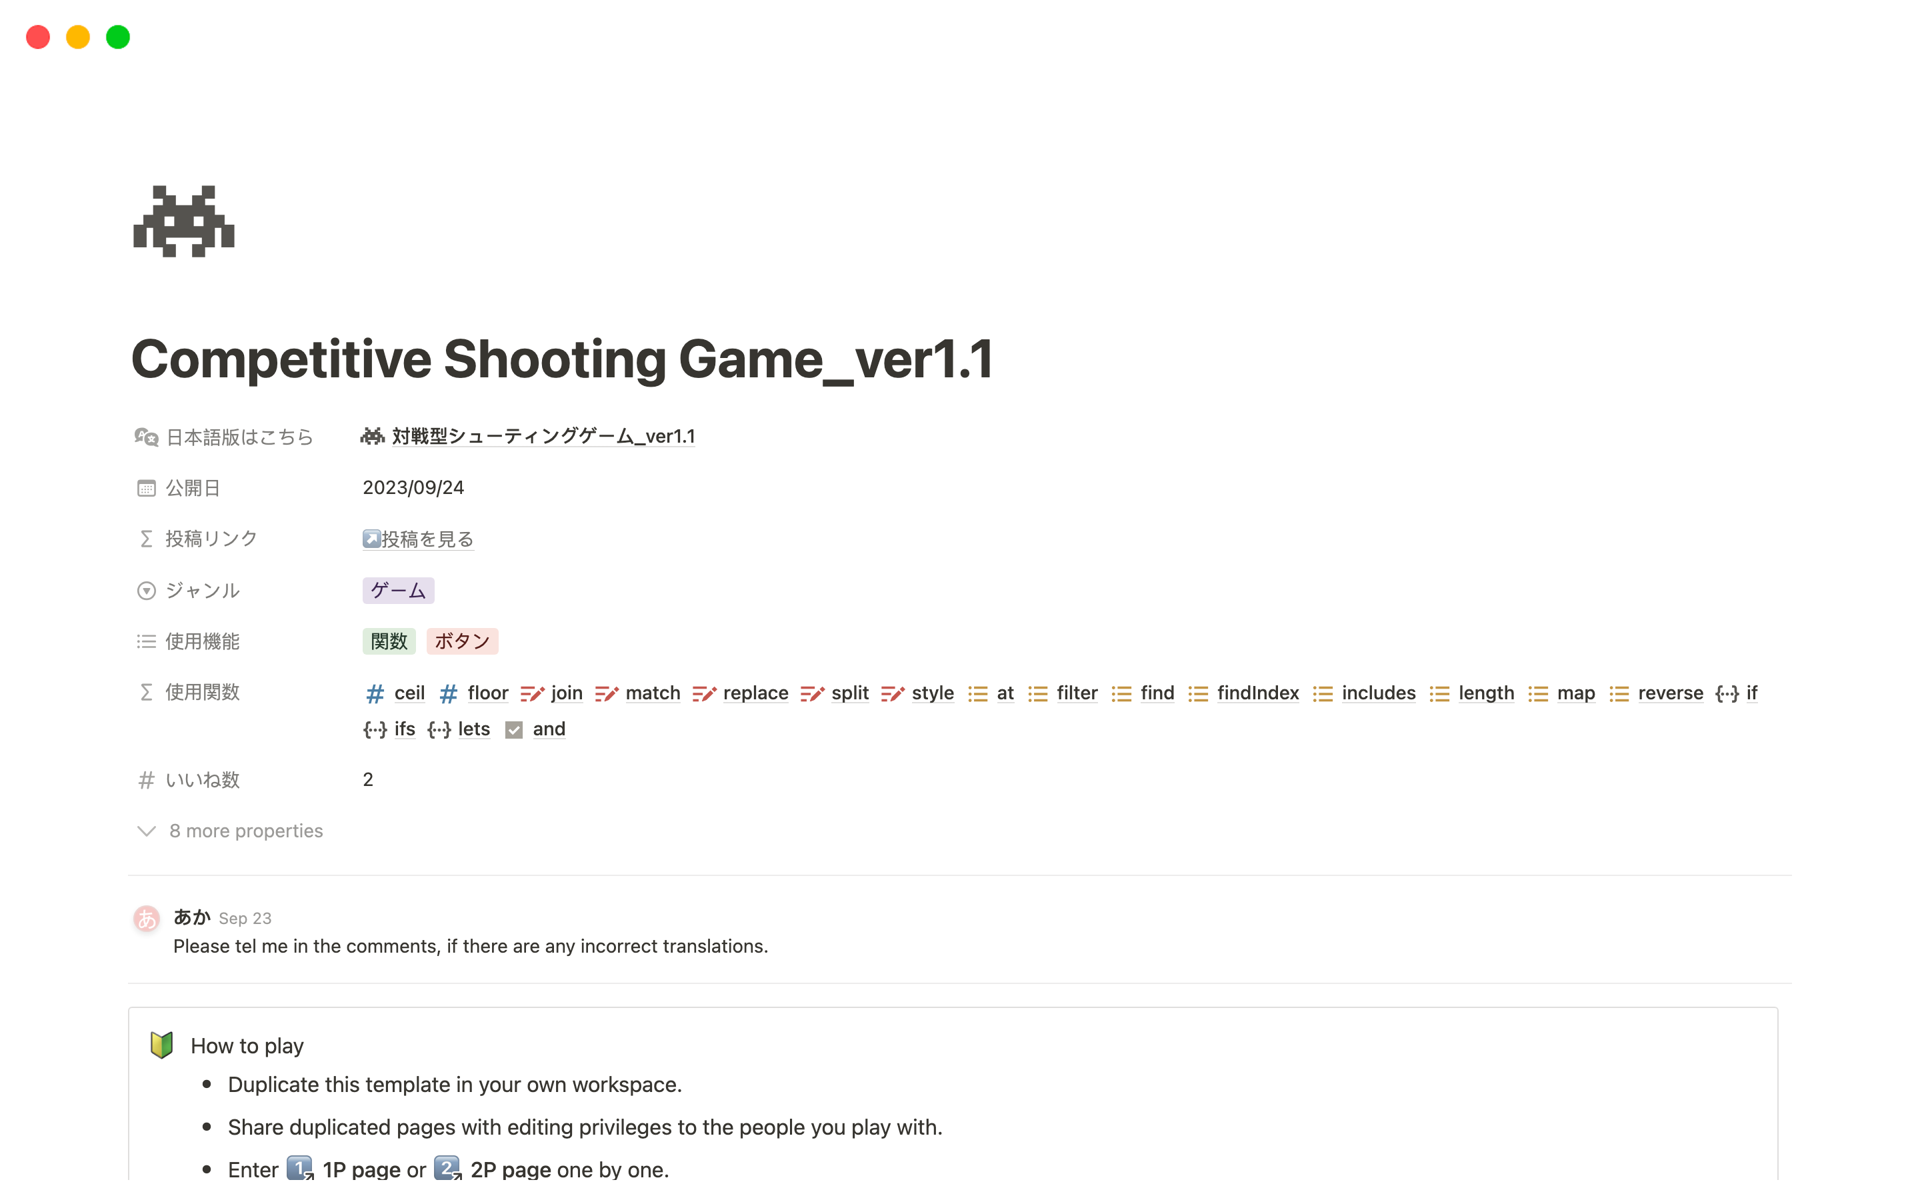 A competitive shooting game that you can play on Notion.